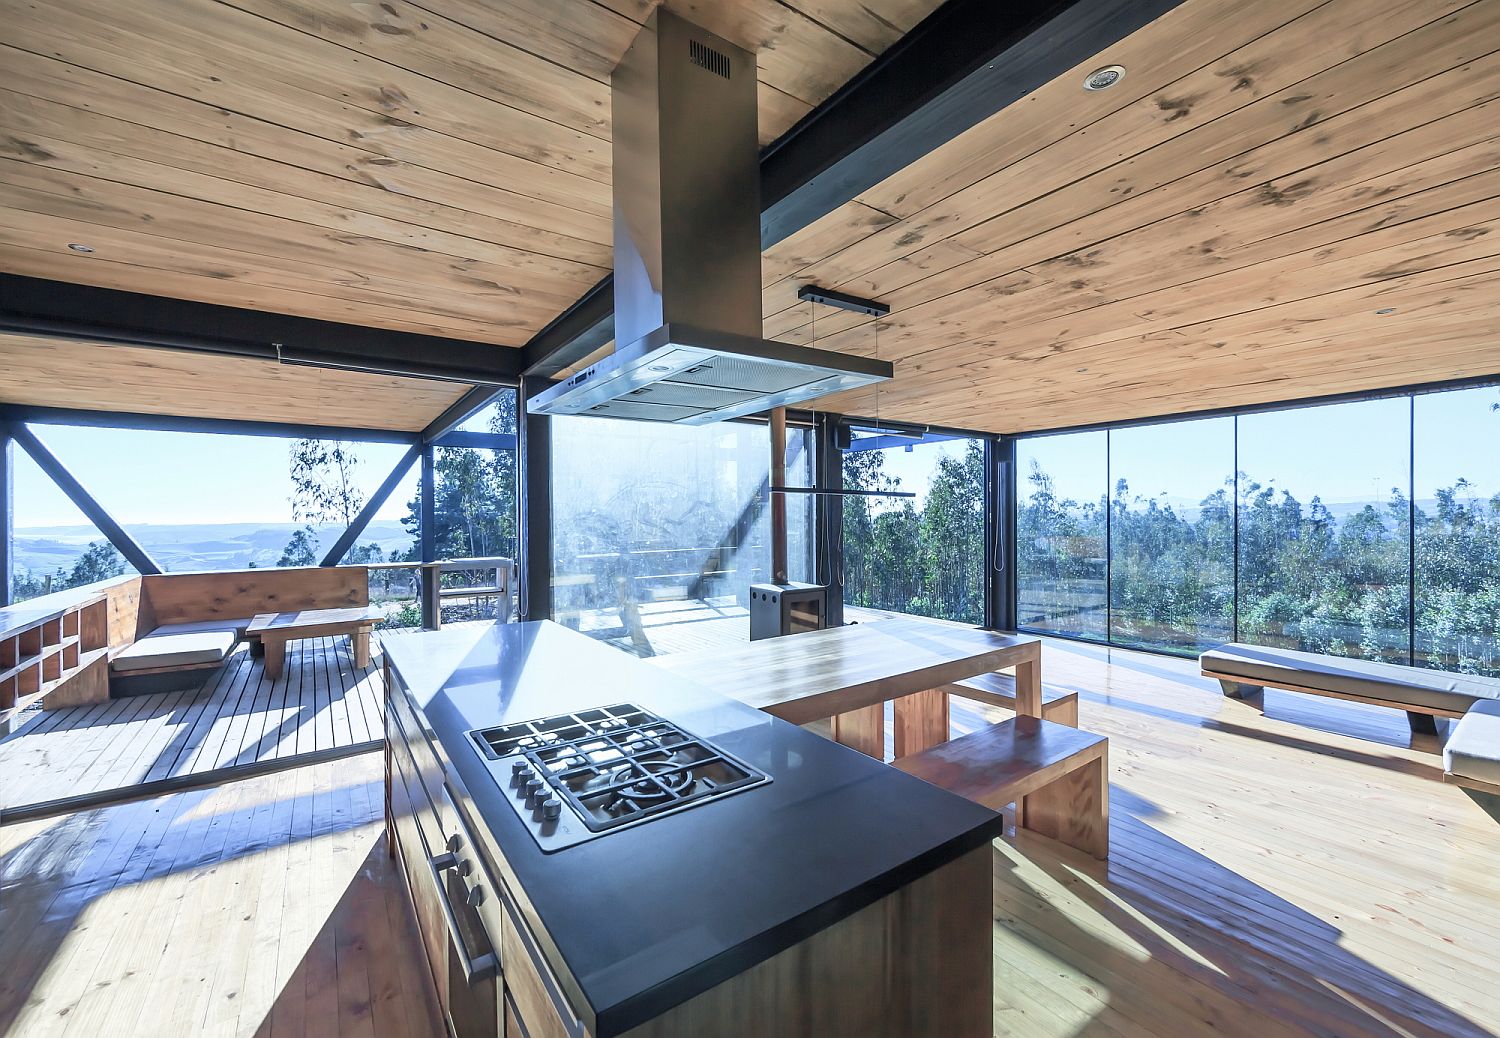 Glass-walls-and-the-wooden-deck-outside-give-this-kitchen-an-open-vibe